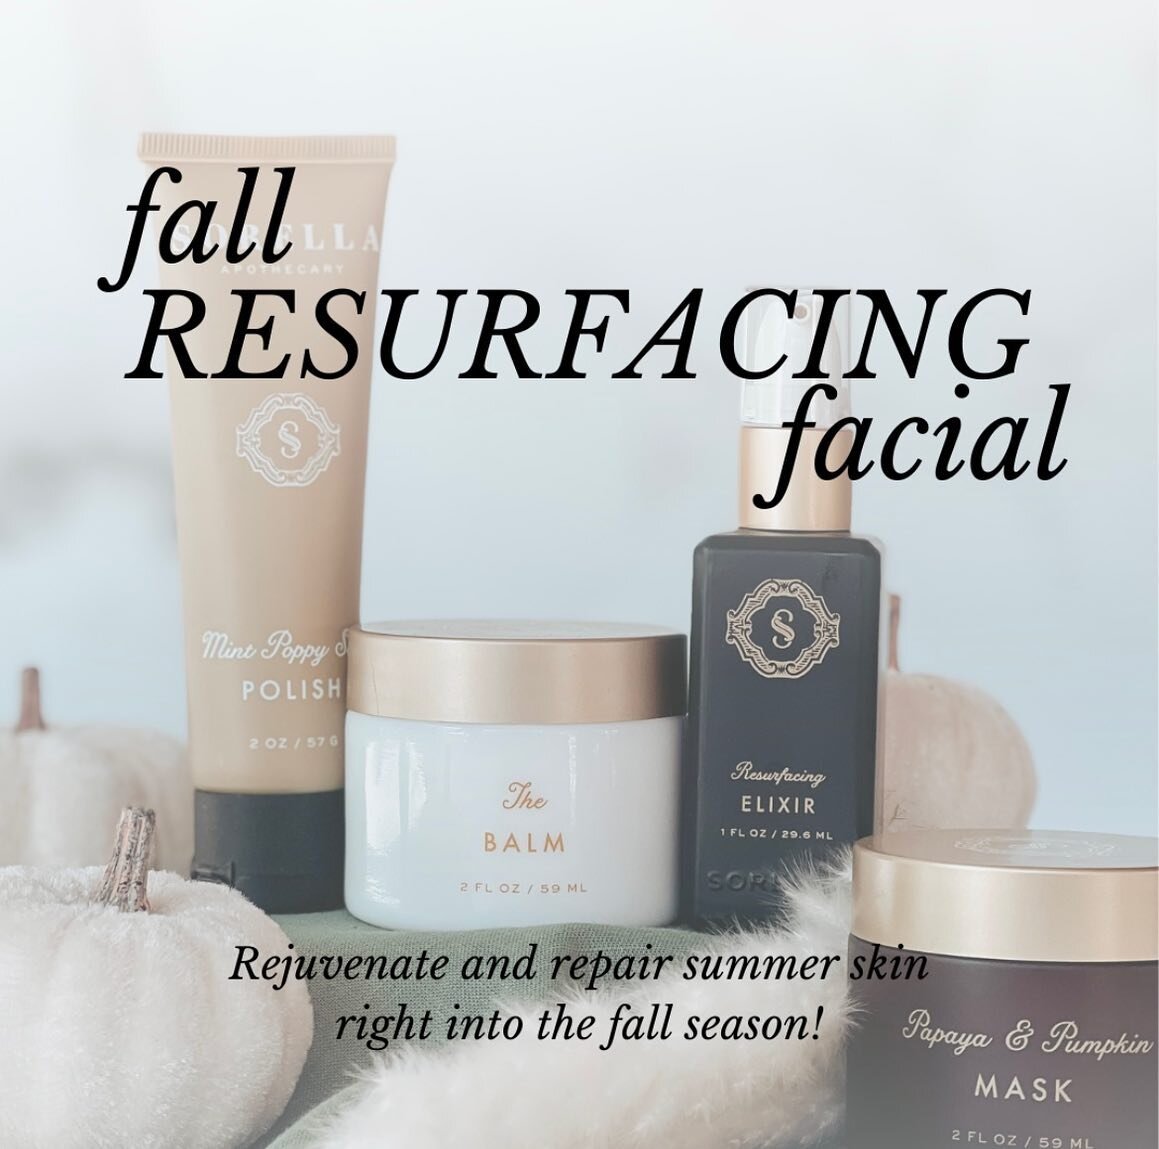 NOW BOOKING! Fall is right around the corner🍂 and that means PEEL SEASON IS ALMOST HERE! It&rsquo;s time to start prepping!

The Fall Resurfacing Facial is the best way to transition your skin from Summer to Fall. This treatment includes Sorella&rsq